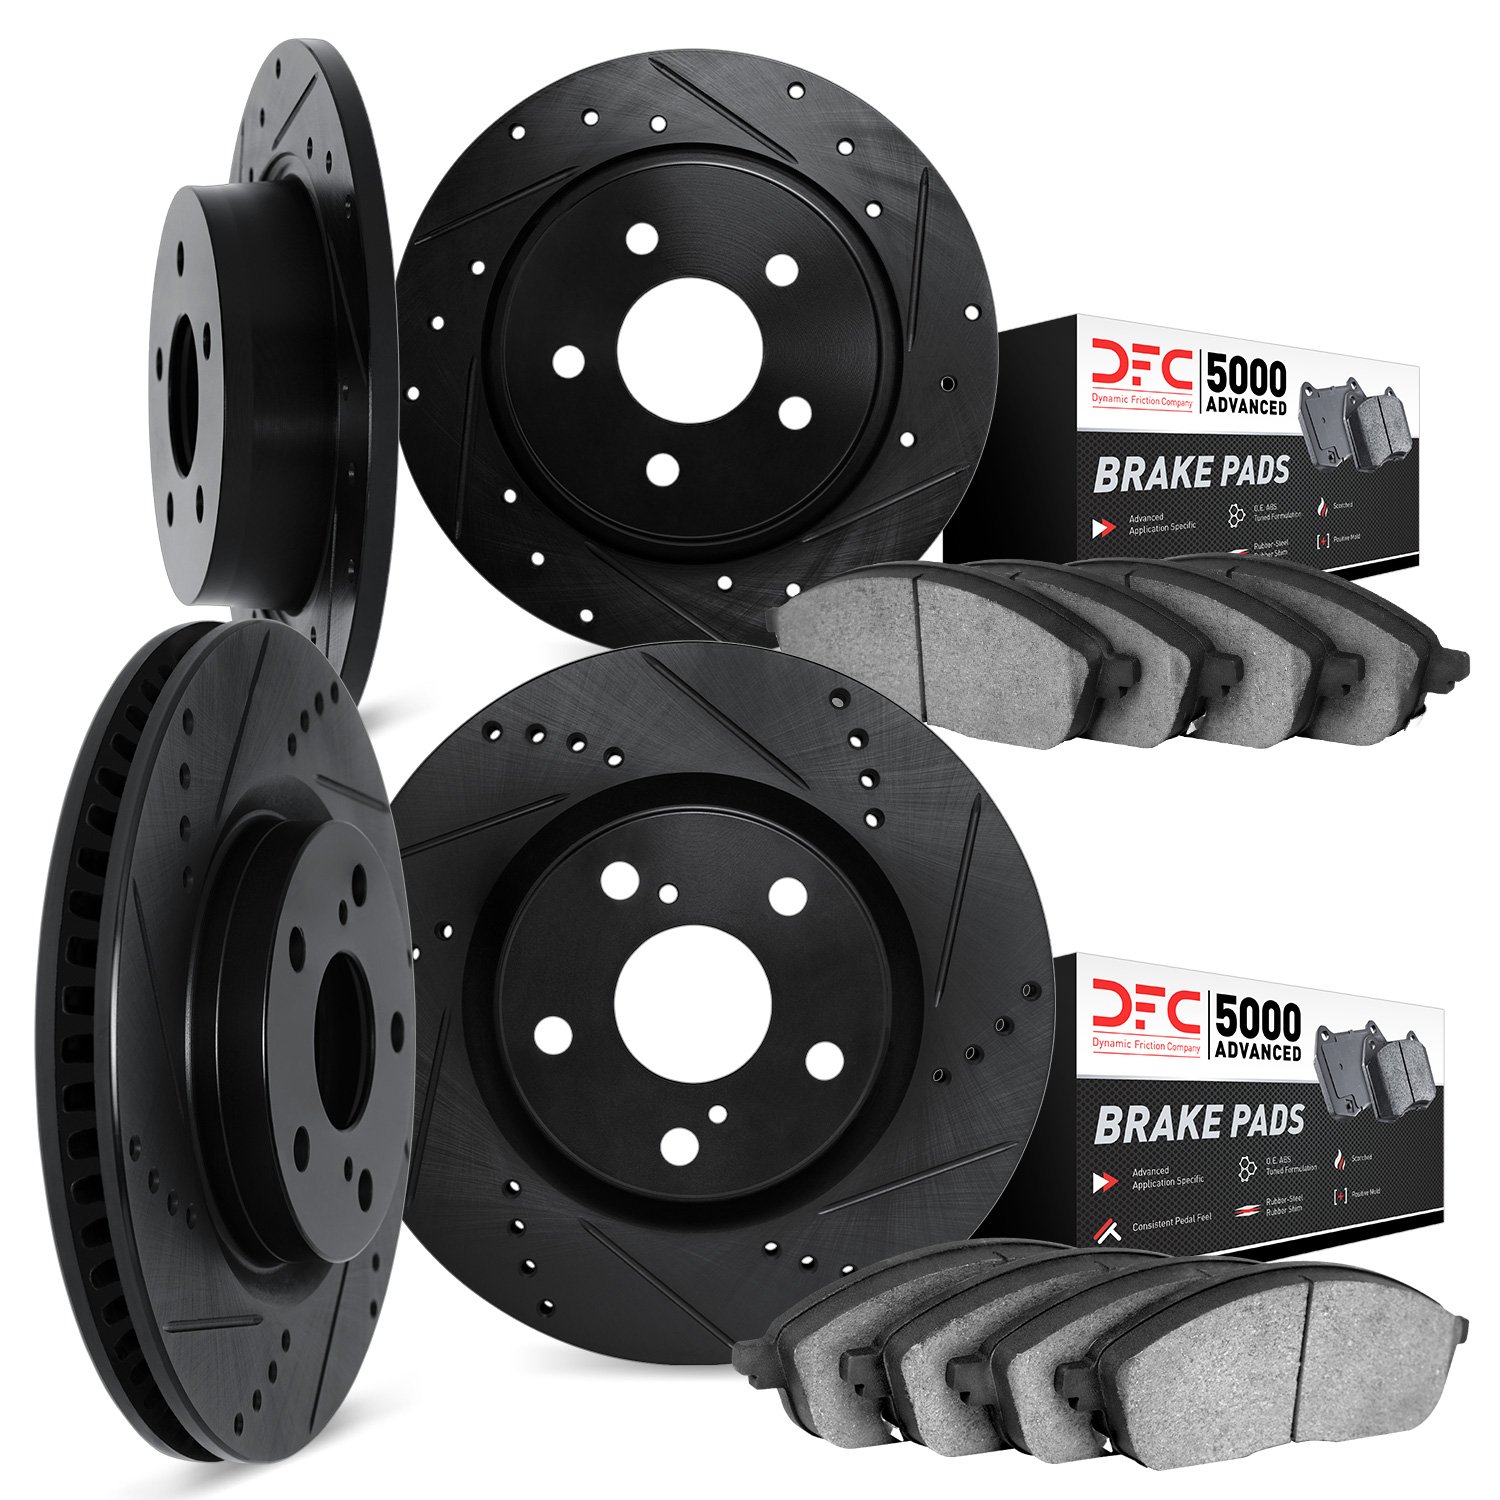 8504-53010 Drilled/Slotted Brake Rotors w/5000 Advanced Brake Pads Kit [Black], 2004-2012 GM, Position: Front and Rear